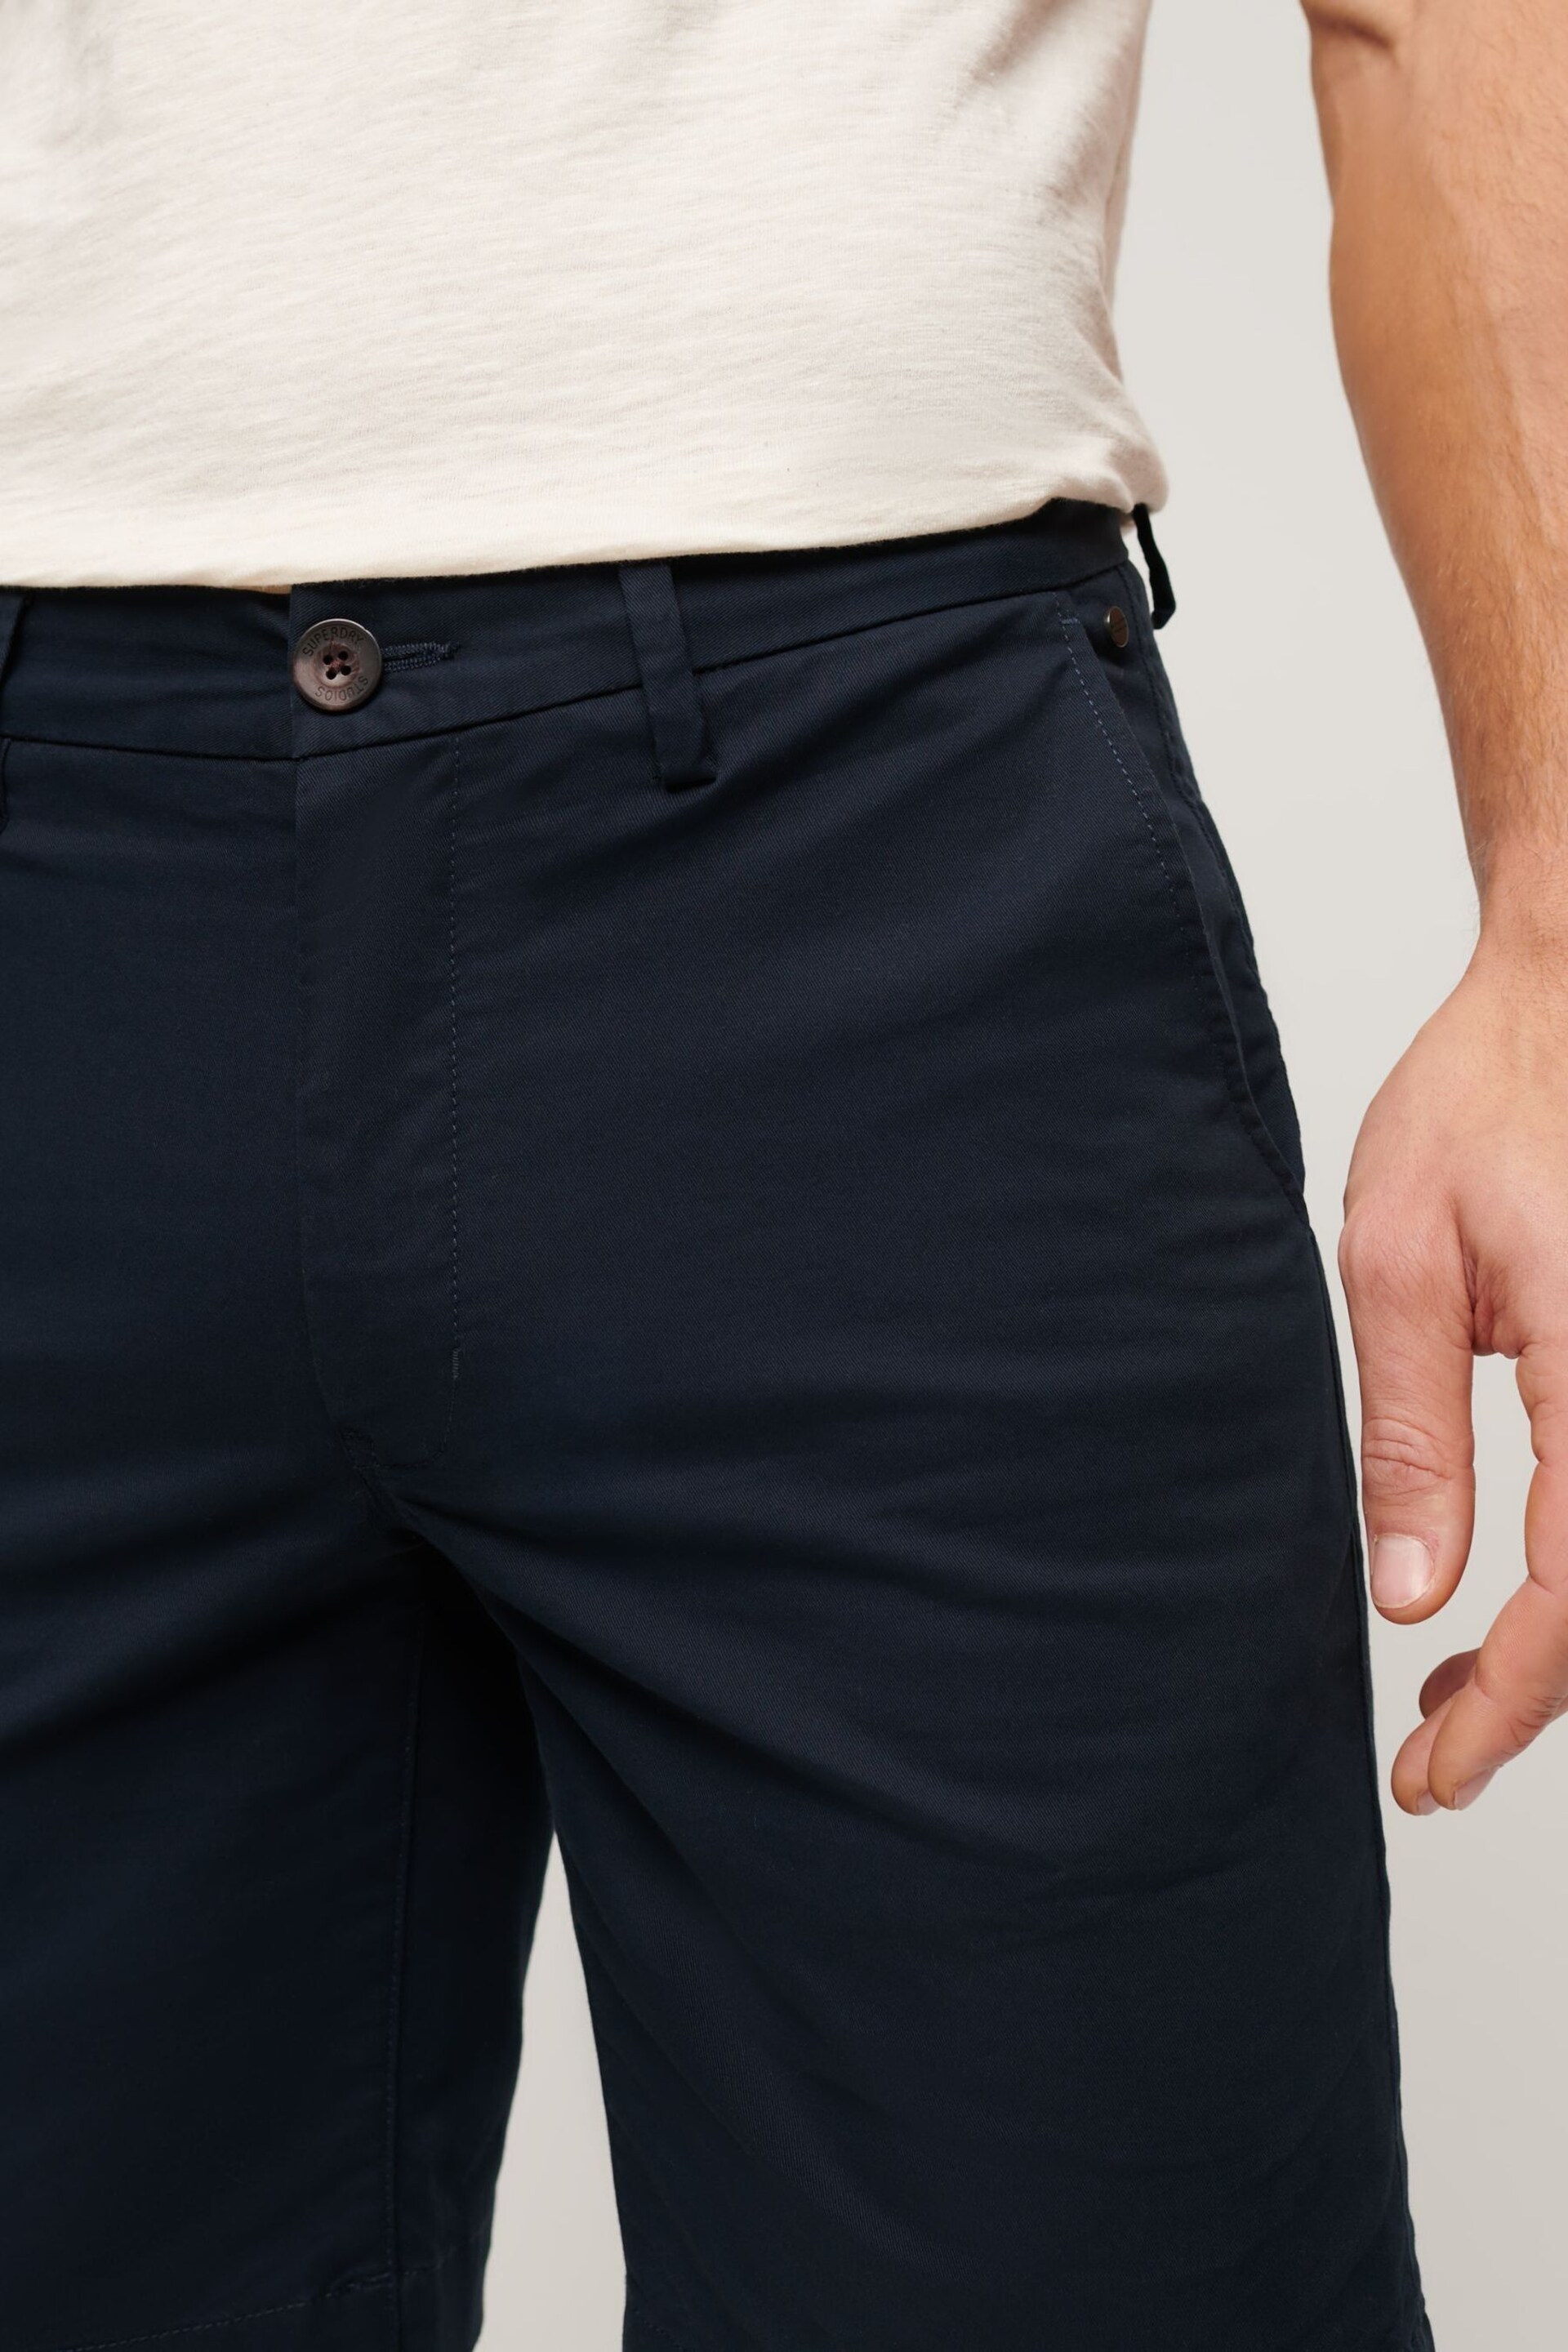 Superdry Blue Stretch Chinos Shorts - Image 4 of 7